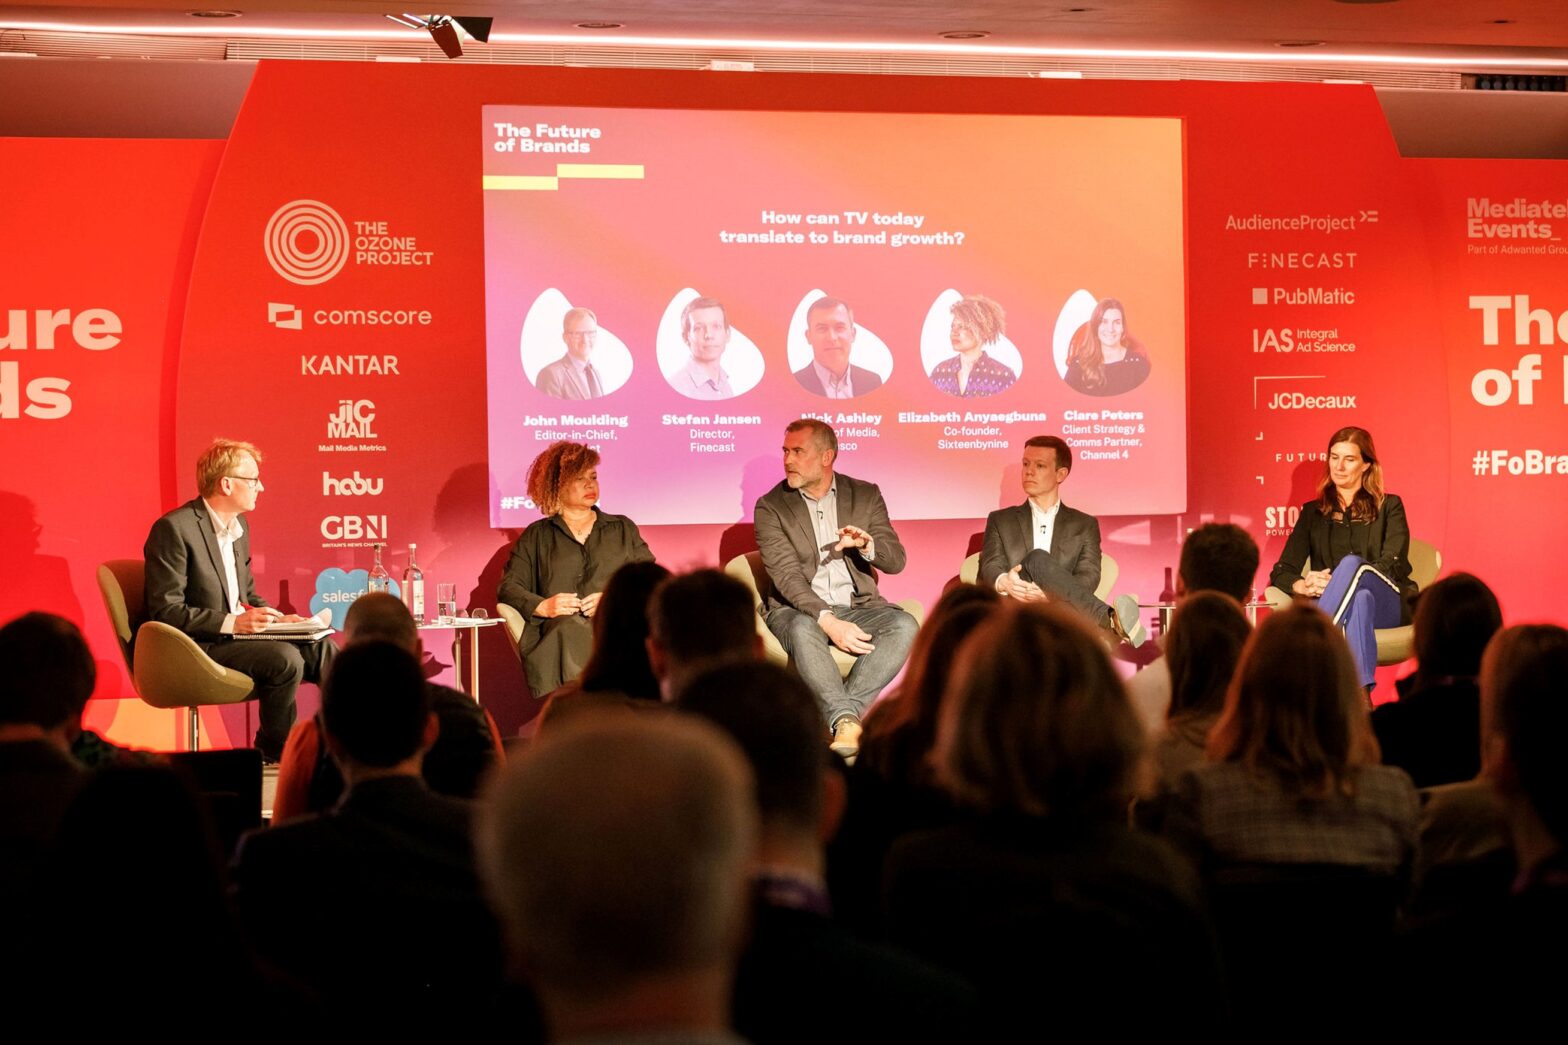 Watch: How can TV today translate to brand growth?